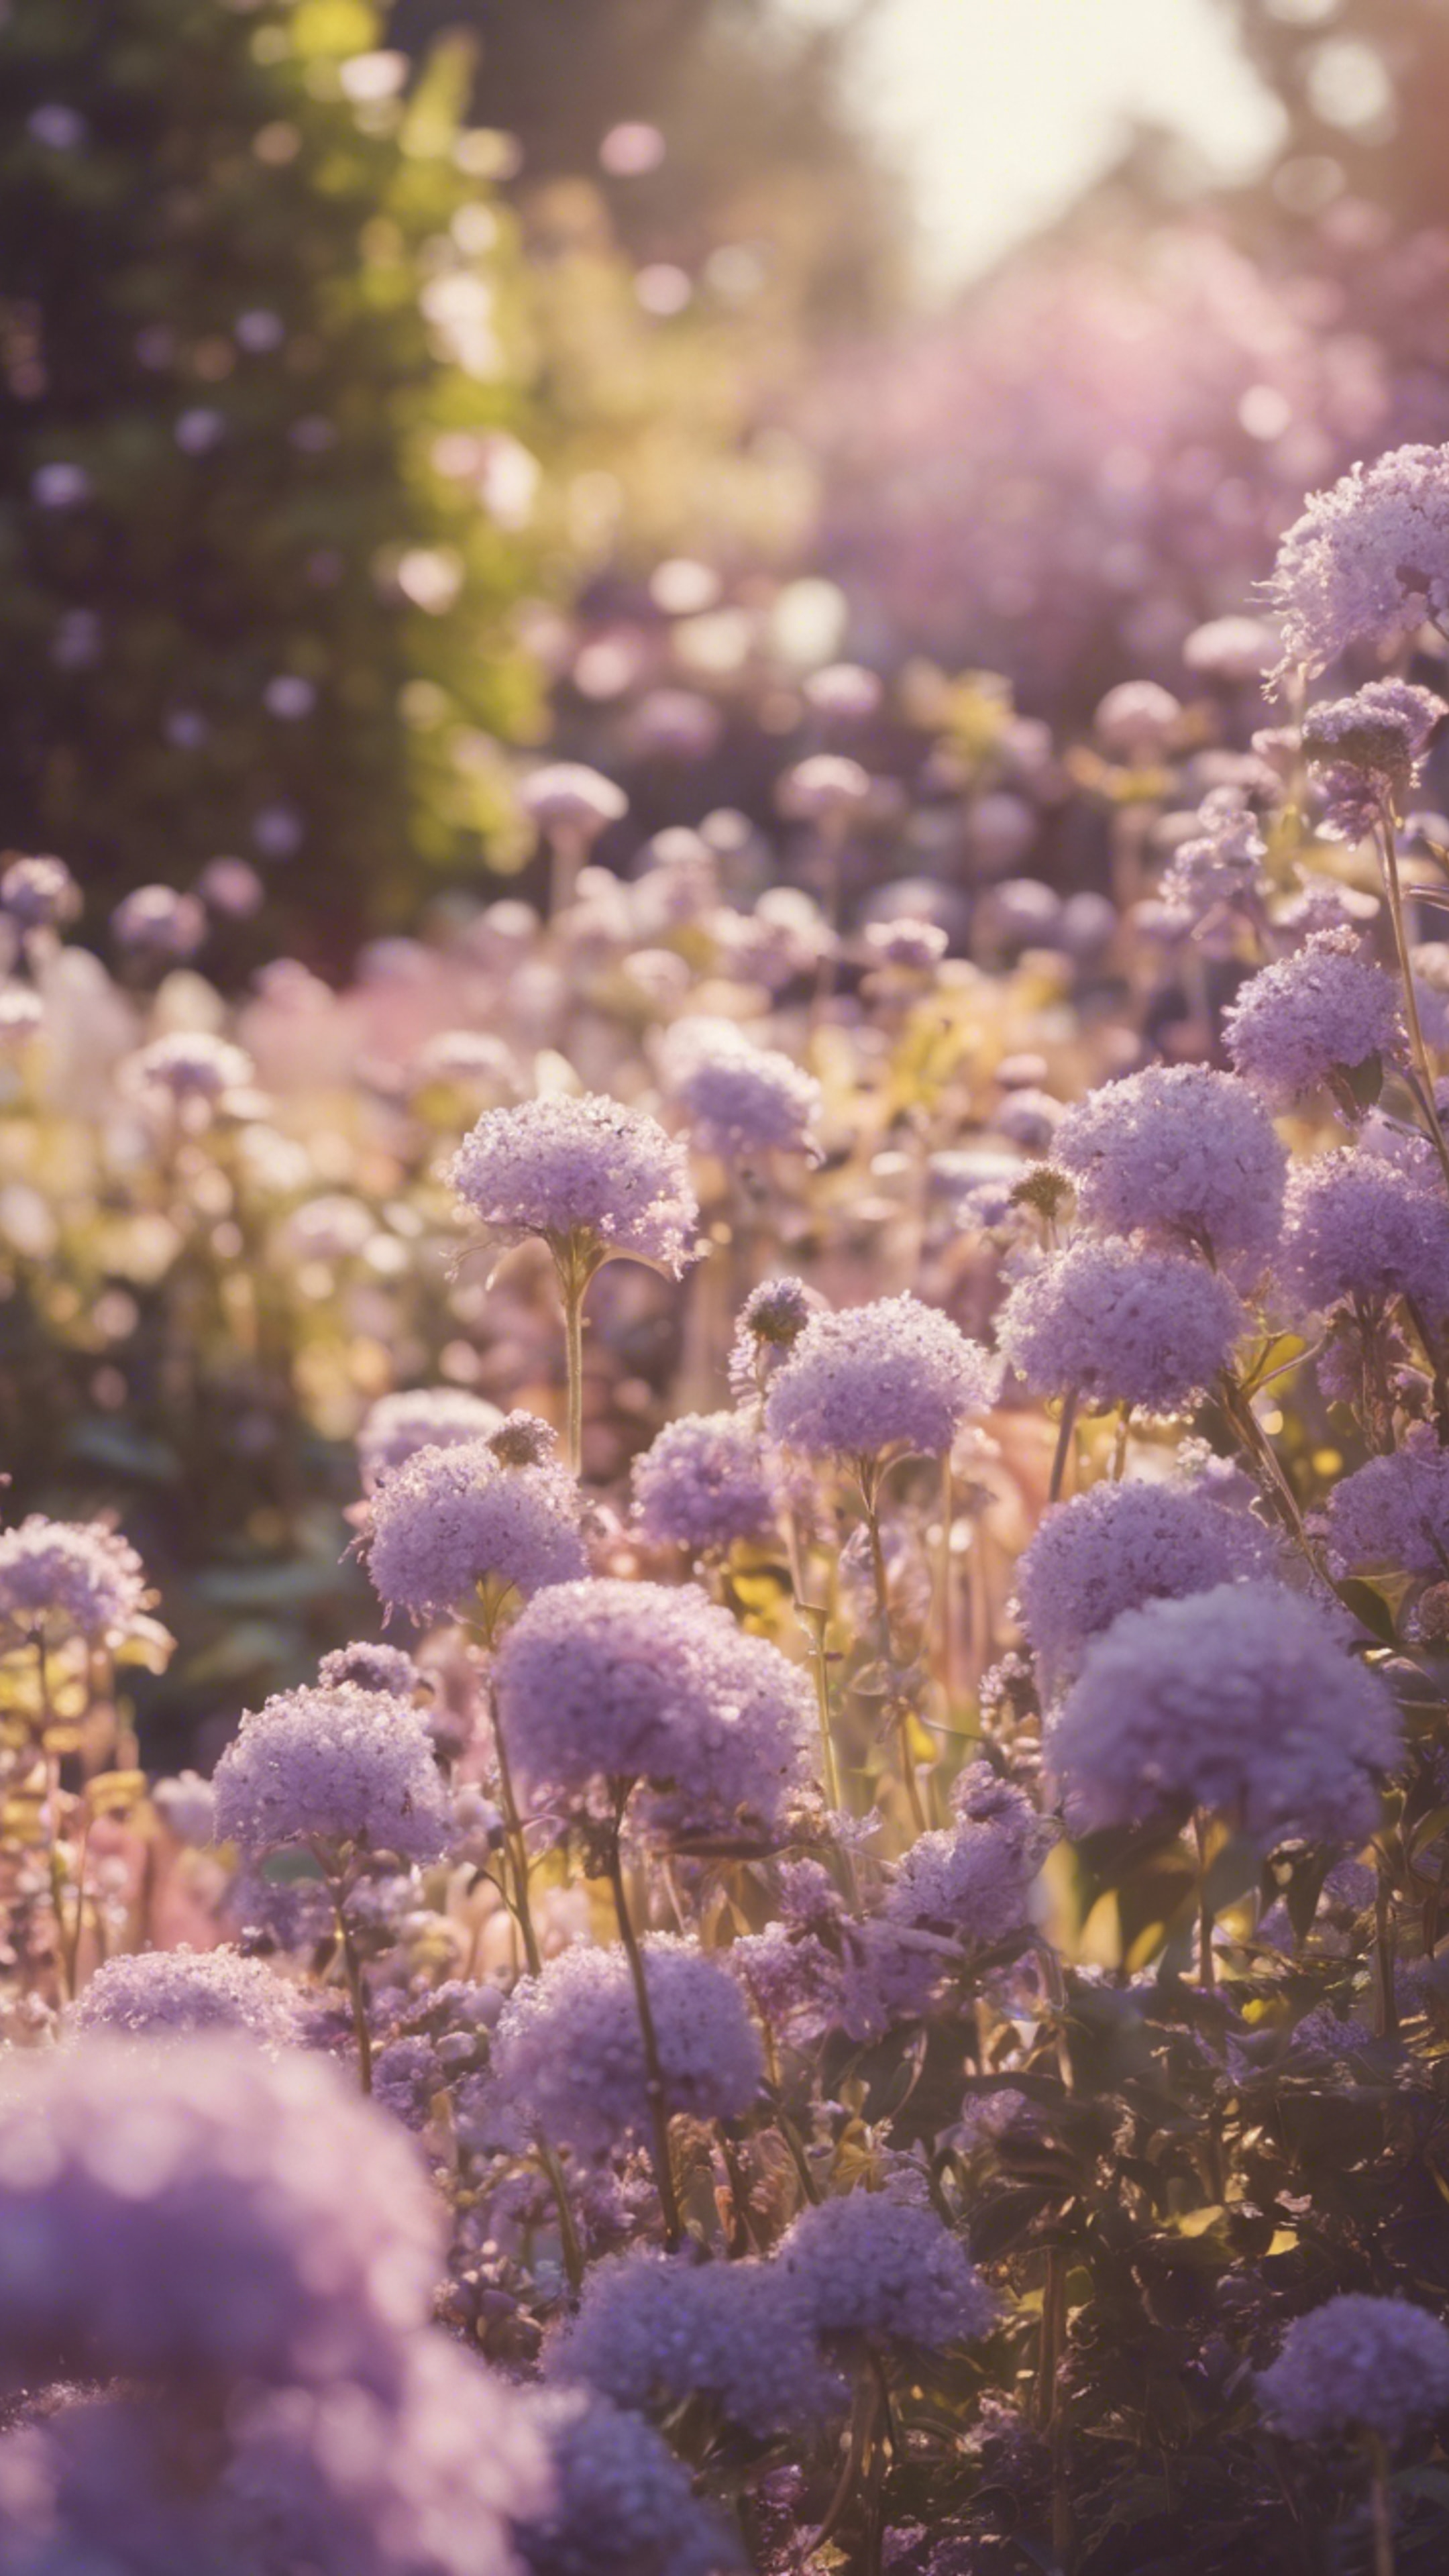 A pastel purple garden in full bloom during a sunny afternoon.壁紙[0a3f4f6cbc4b447bb231]